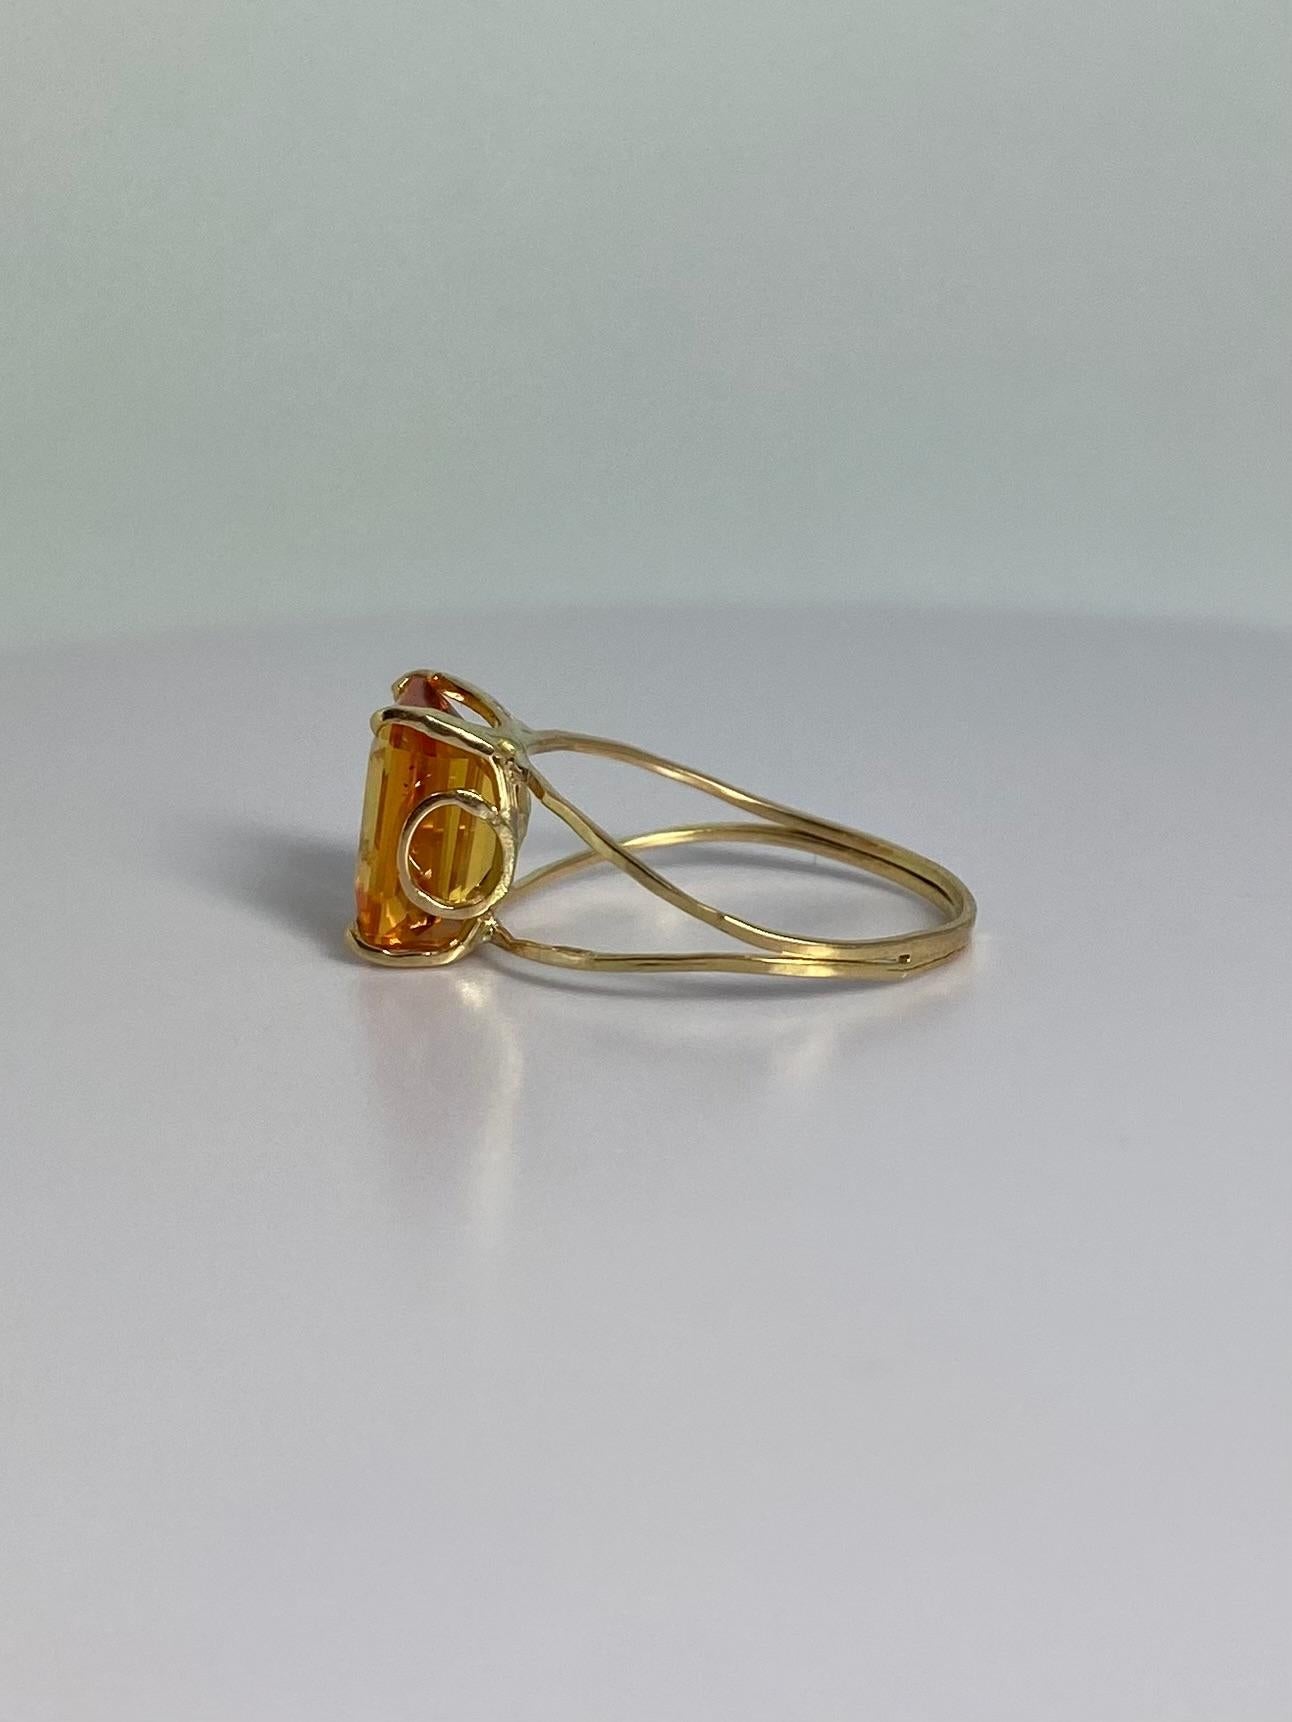 Pre-loved ring made of 18 carat gold with beautiful emerald faceted citrine For Sale 1